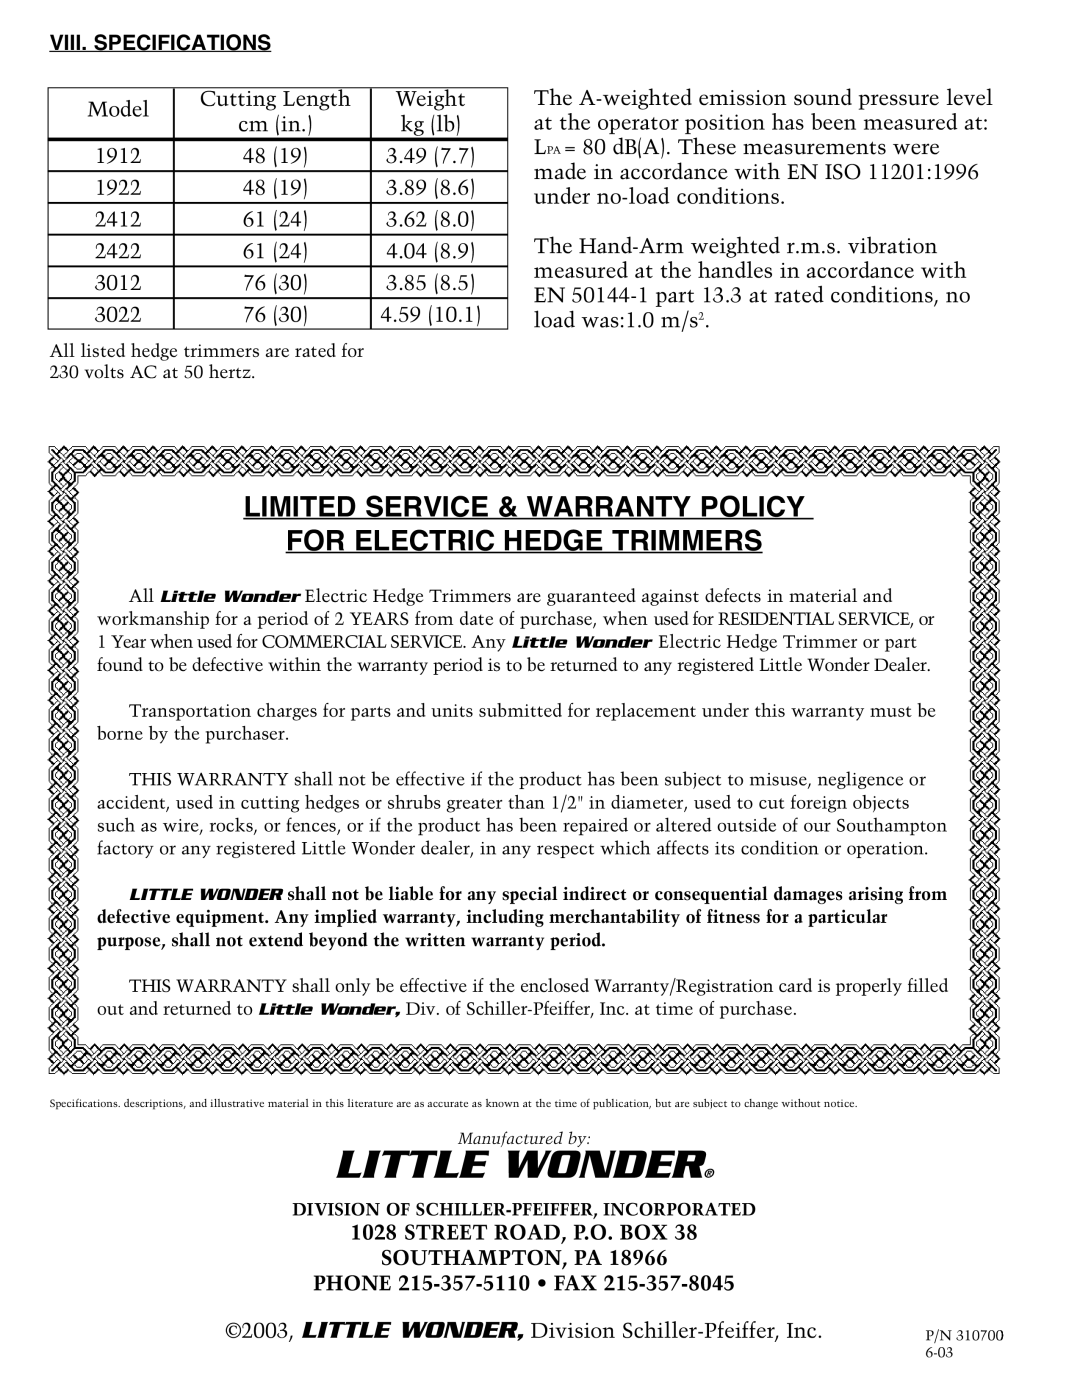 Little Wonder 2410 Little Wonder, Limited Service & Warranty Policy, For Electric Hedge Trimmers, Viii. Specifications 